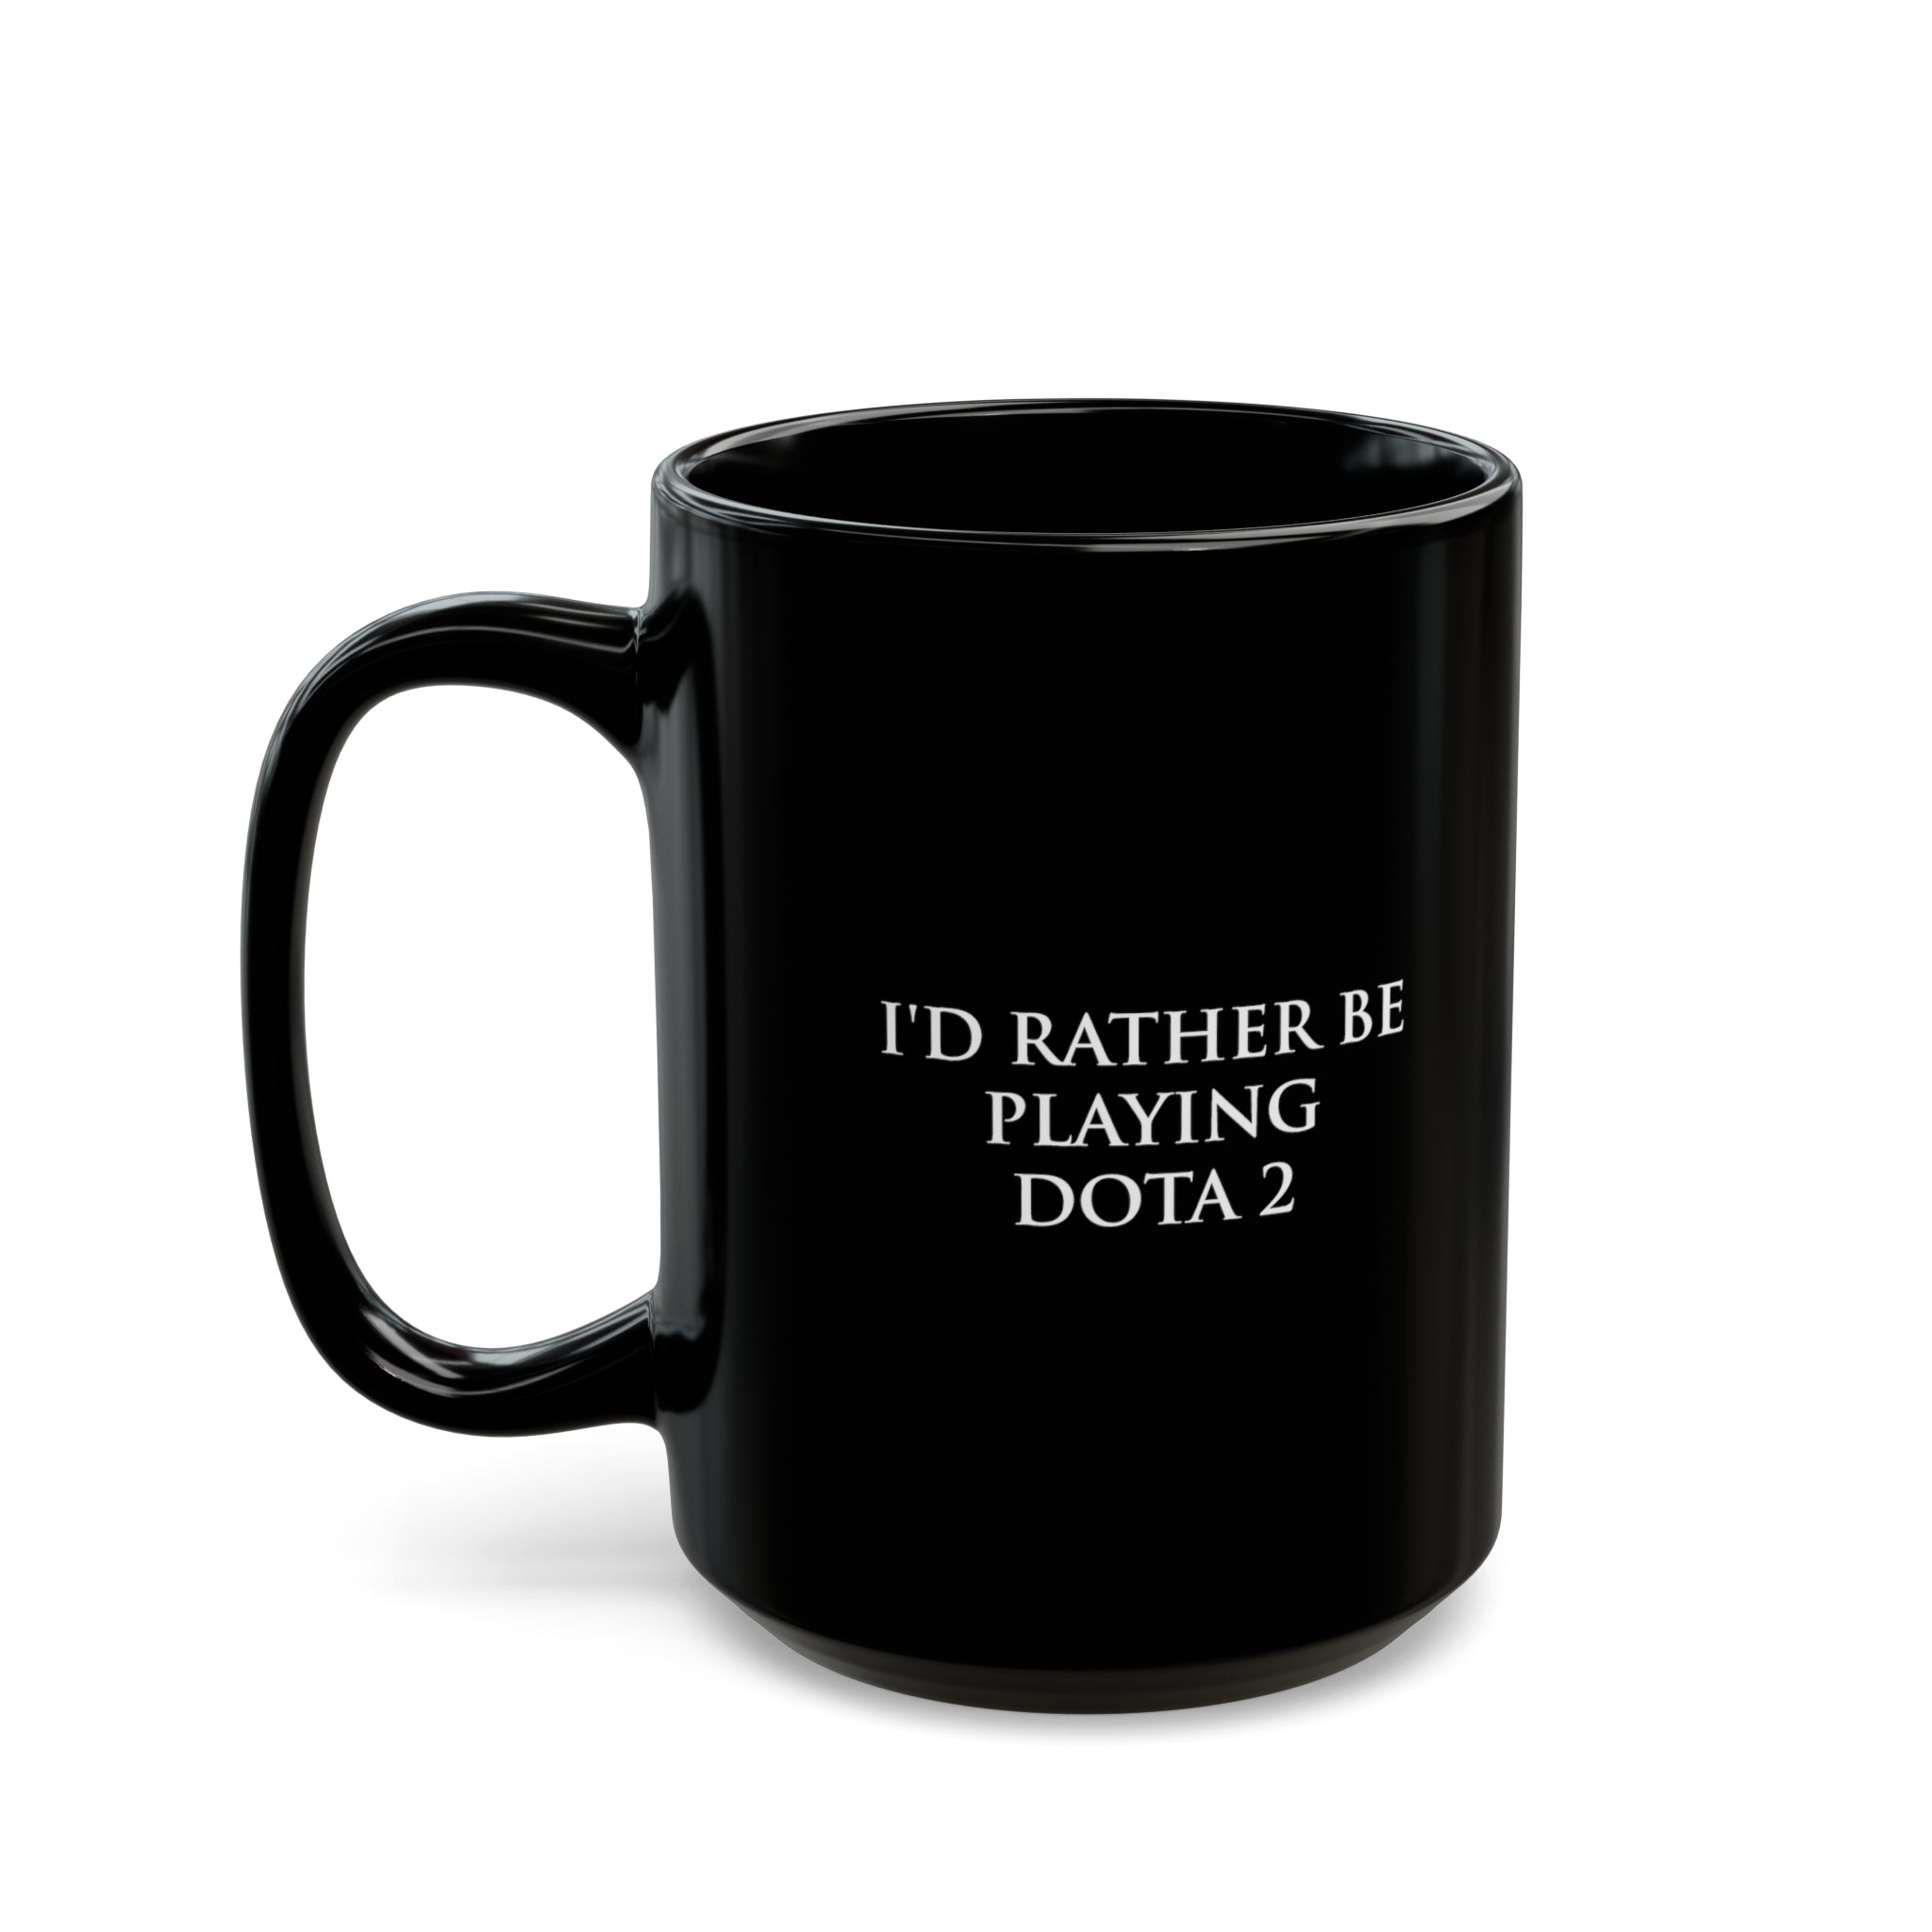 Dota 2 I'd Rather Be Playing Black Mug (11oz, 15oz) Cups Mugs Cup Gamer Gift For Him Her Game Cup Cups Mugs Birthday Christmas Valentine's Anniversary Gifts